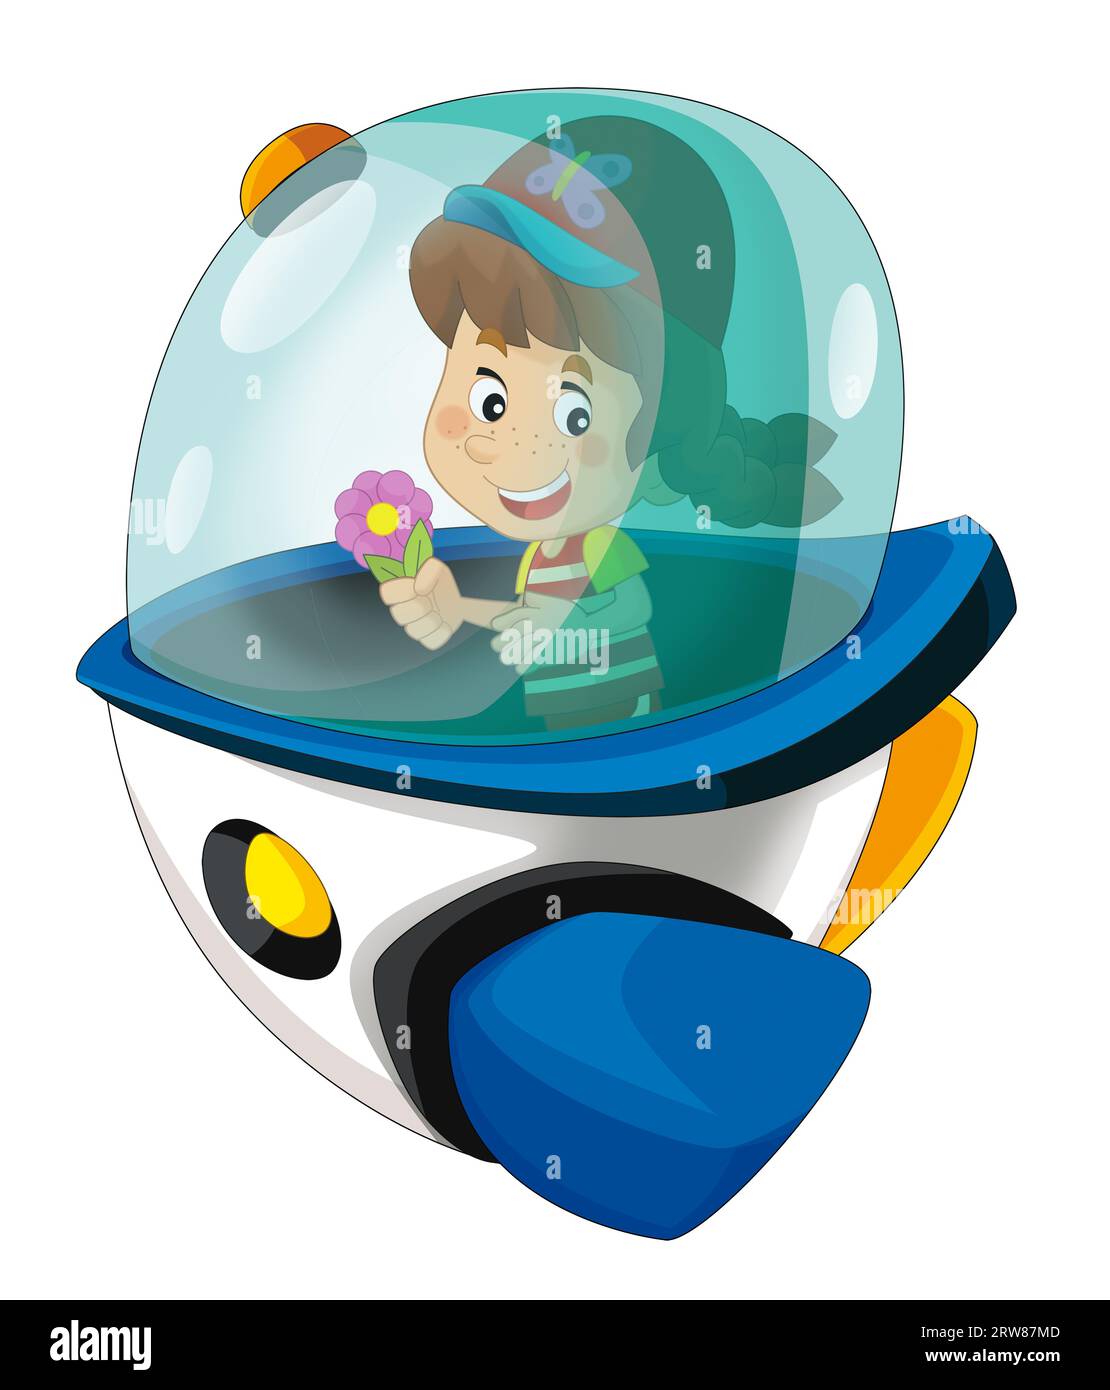 Cartoon kid on a toy funfair space ship or star ship amusement park or playground isolated illustration for kids Stock Photo